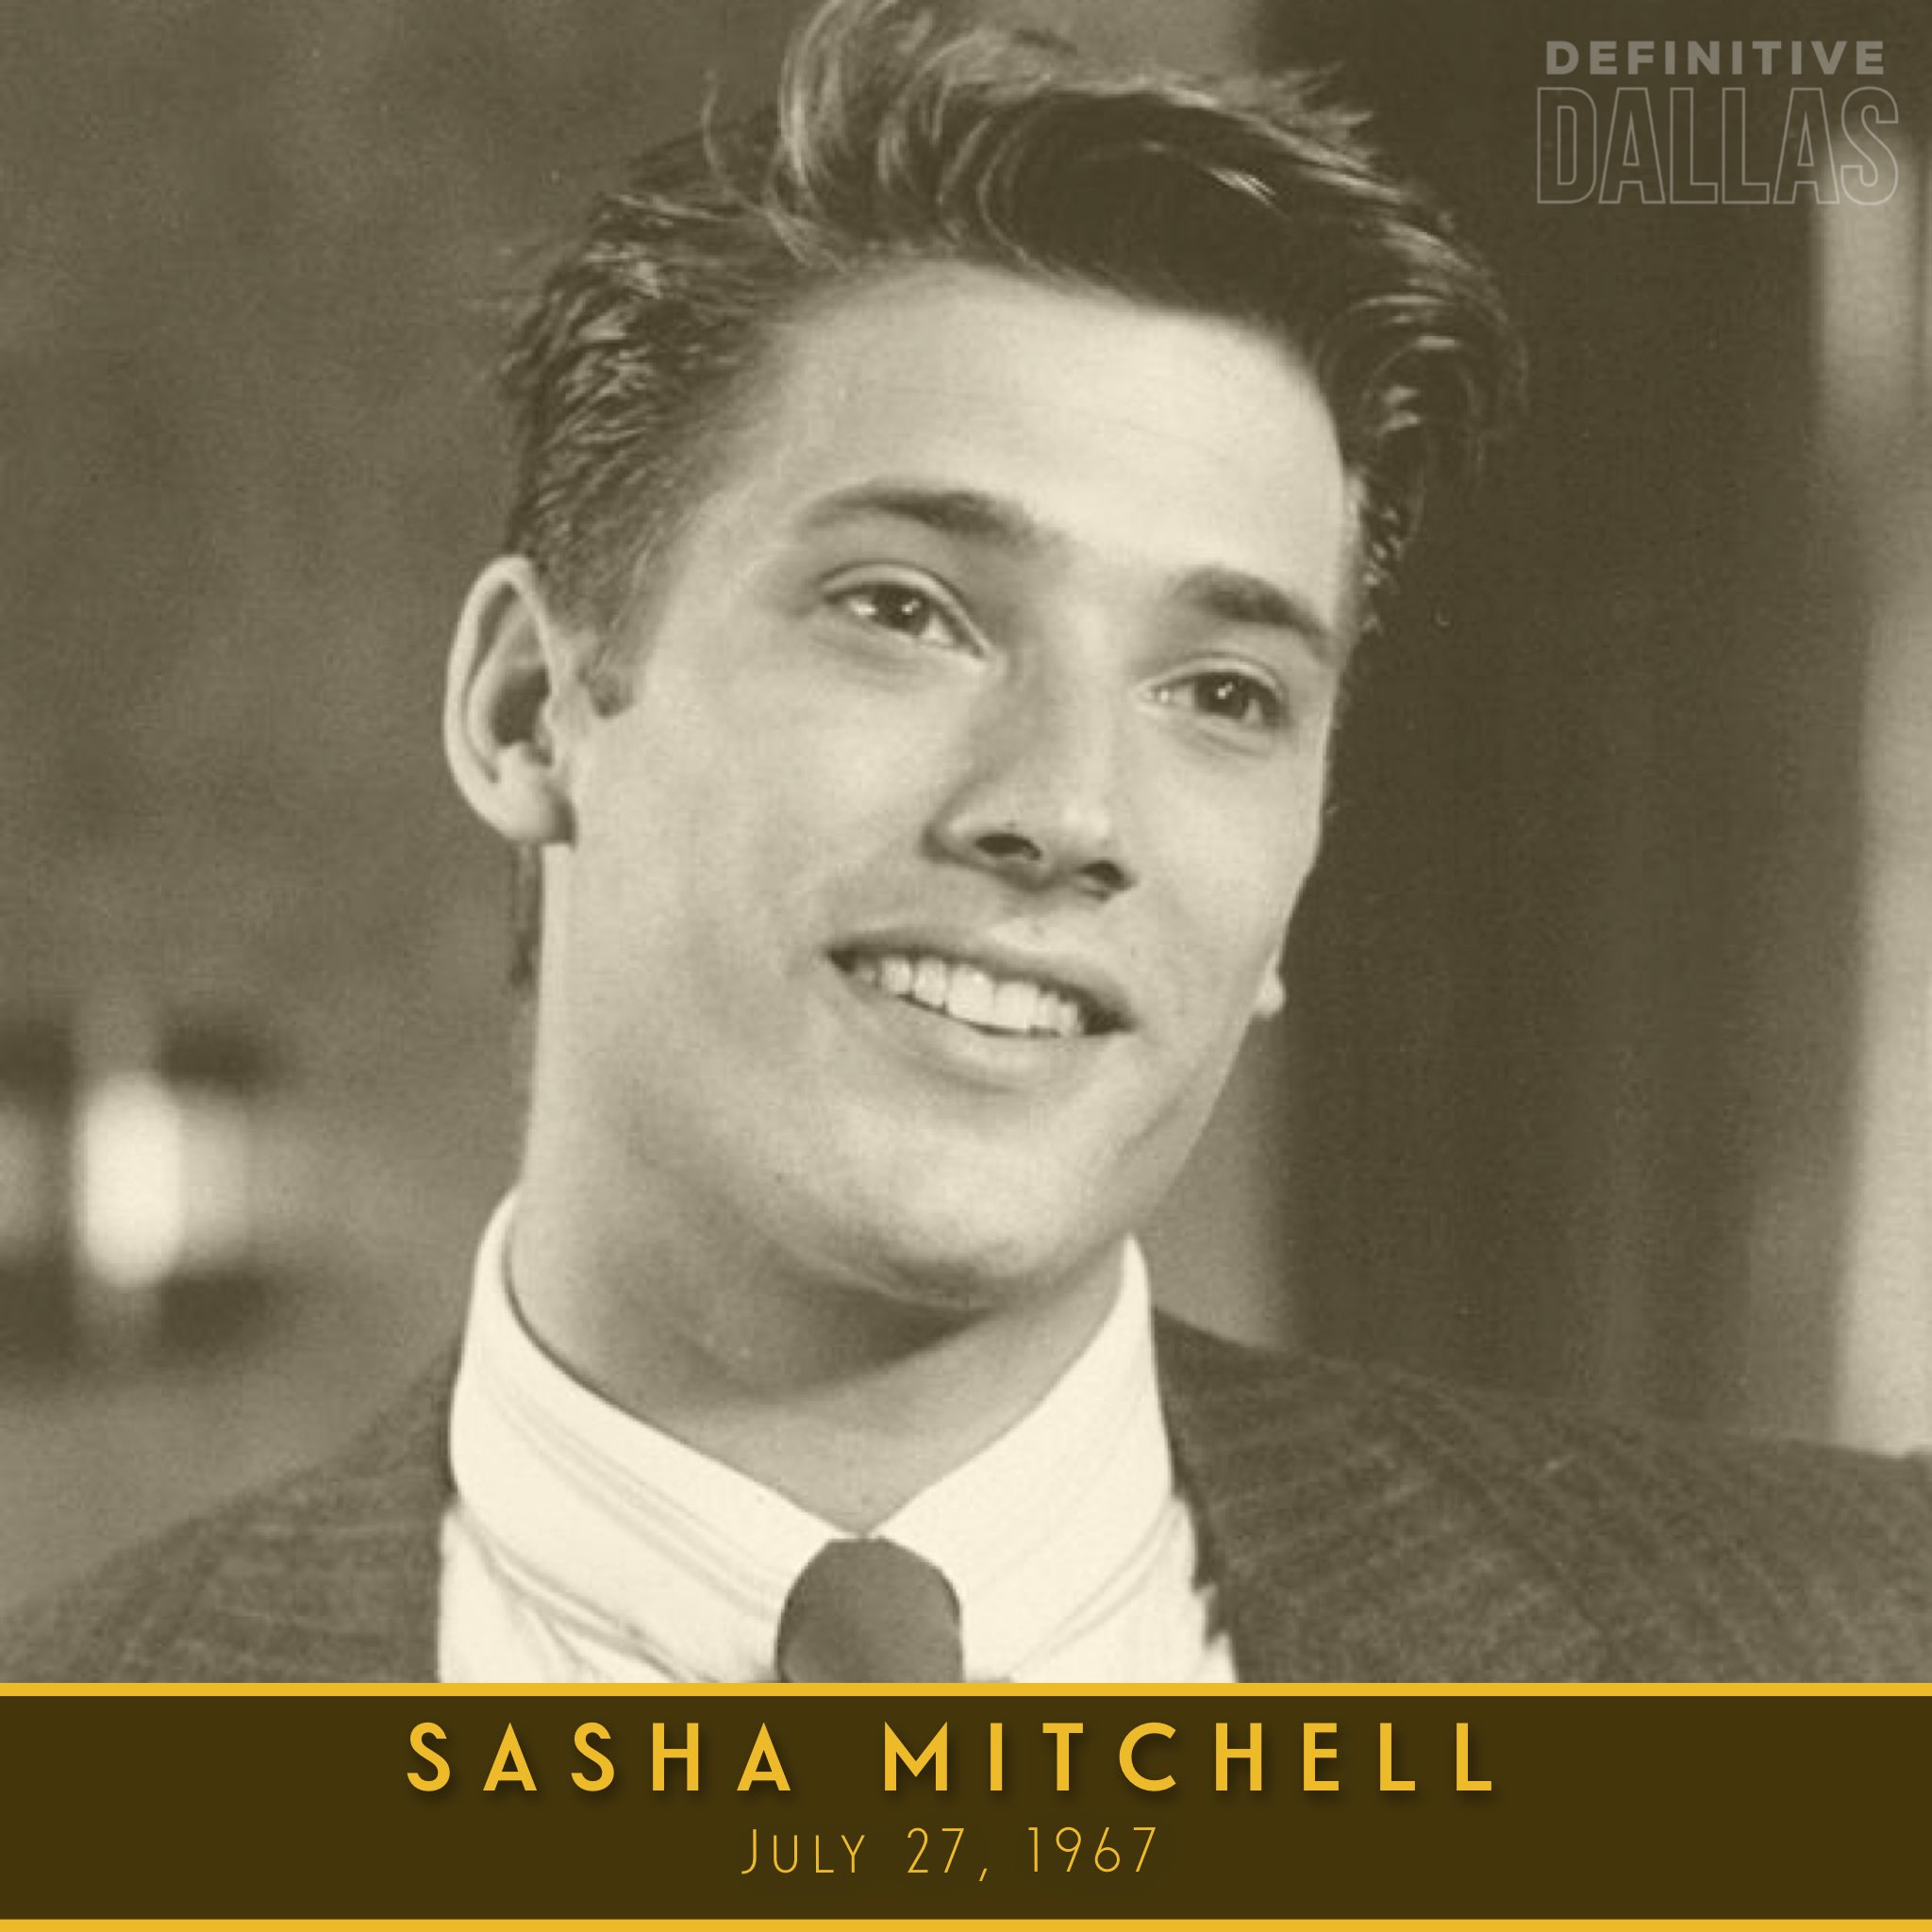 Happy 54th birthday to Sasha Mitchell. He played the part of J.R. s oldest son James Beaumont. 